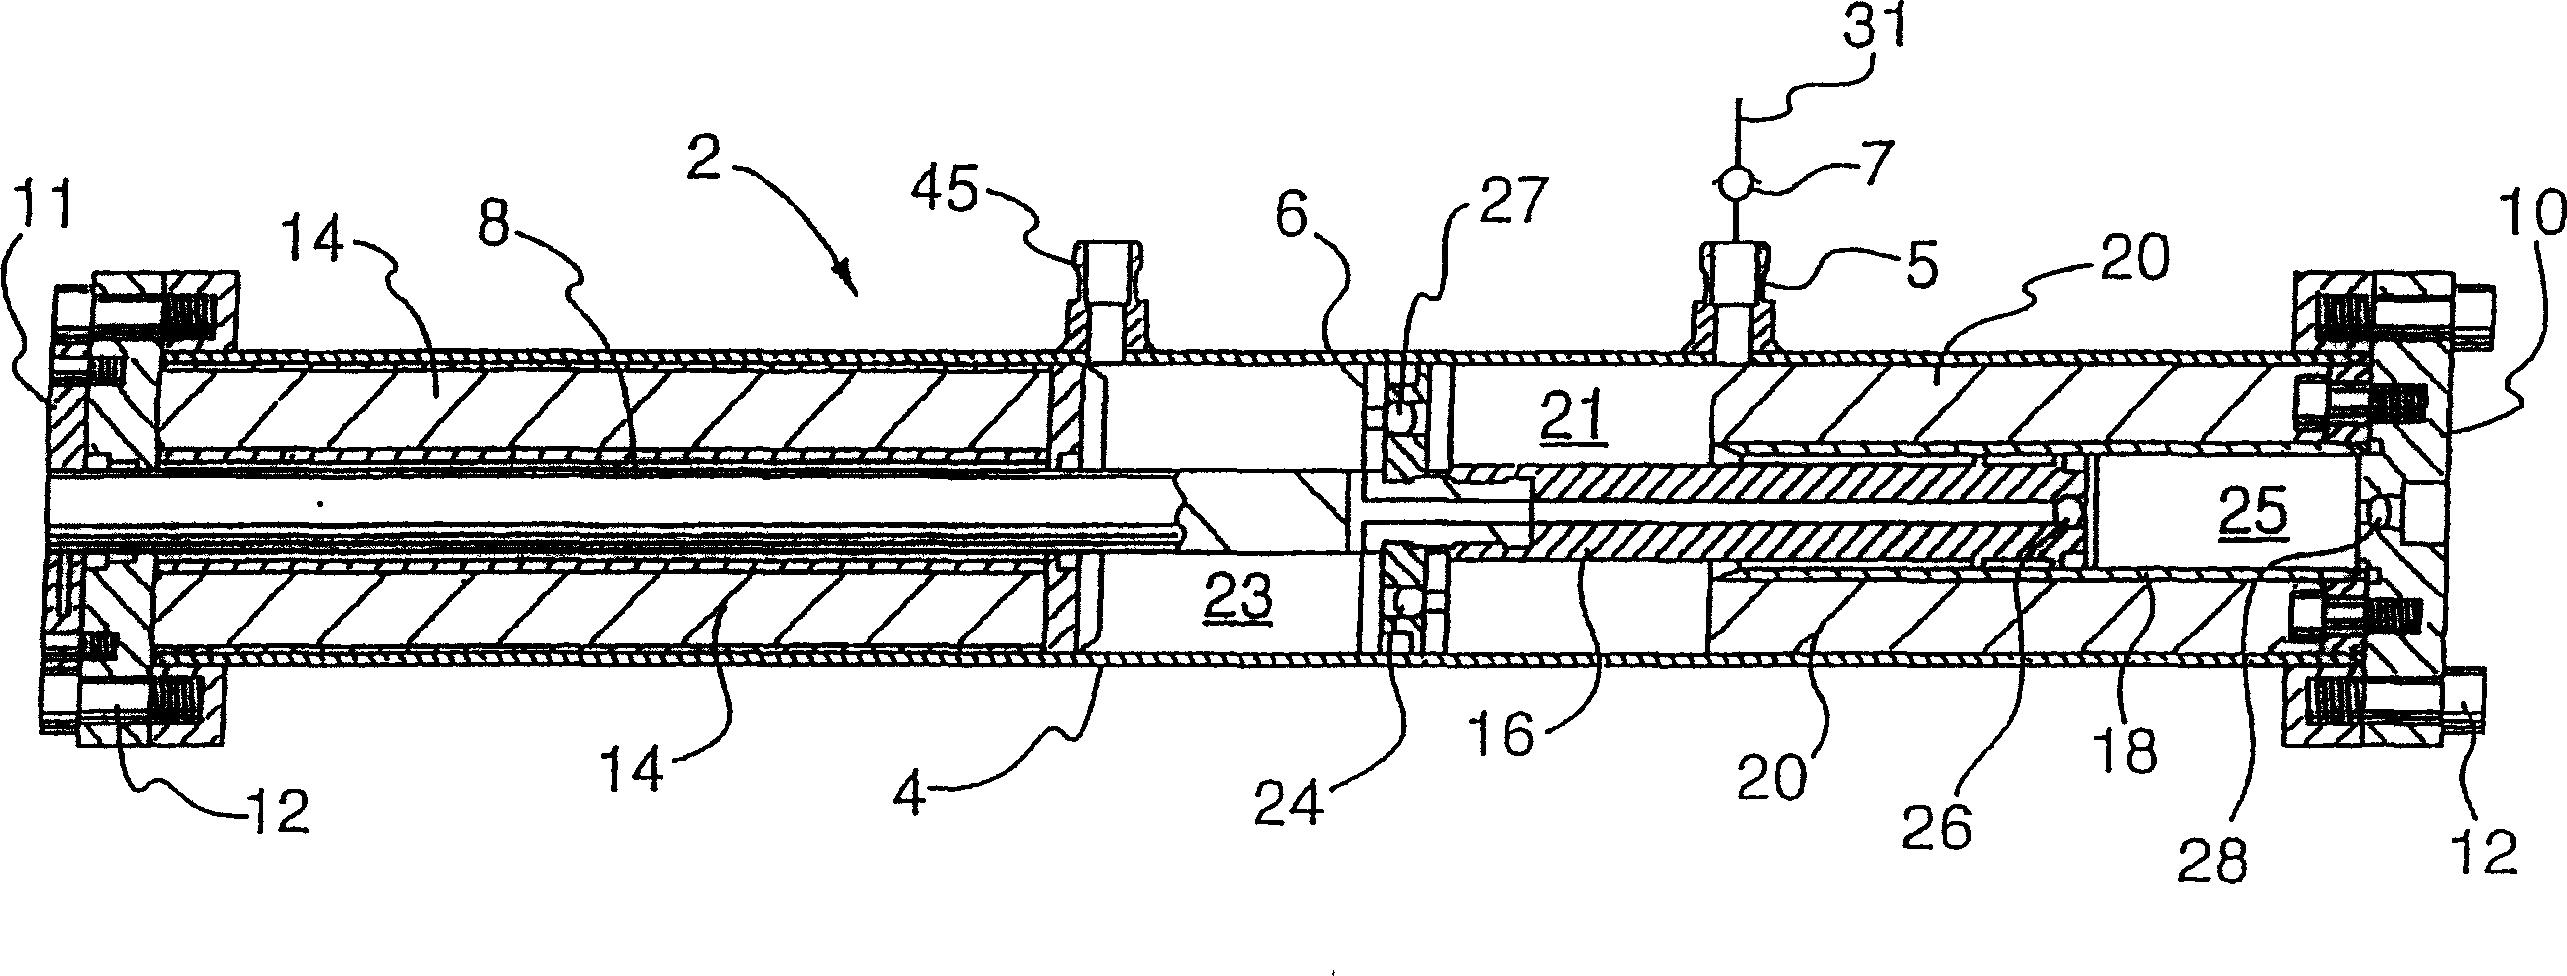 High pressure pump system for supplying a cryogenic fluid from a storage tank